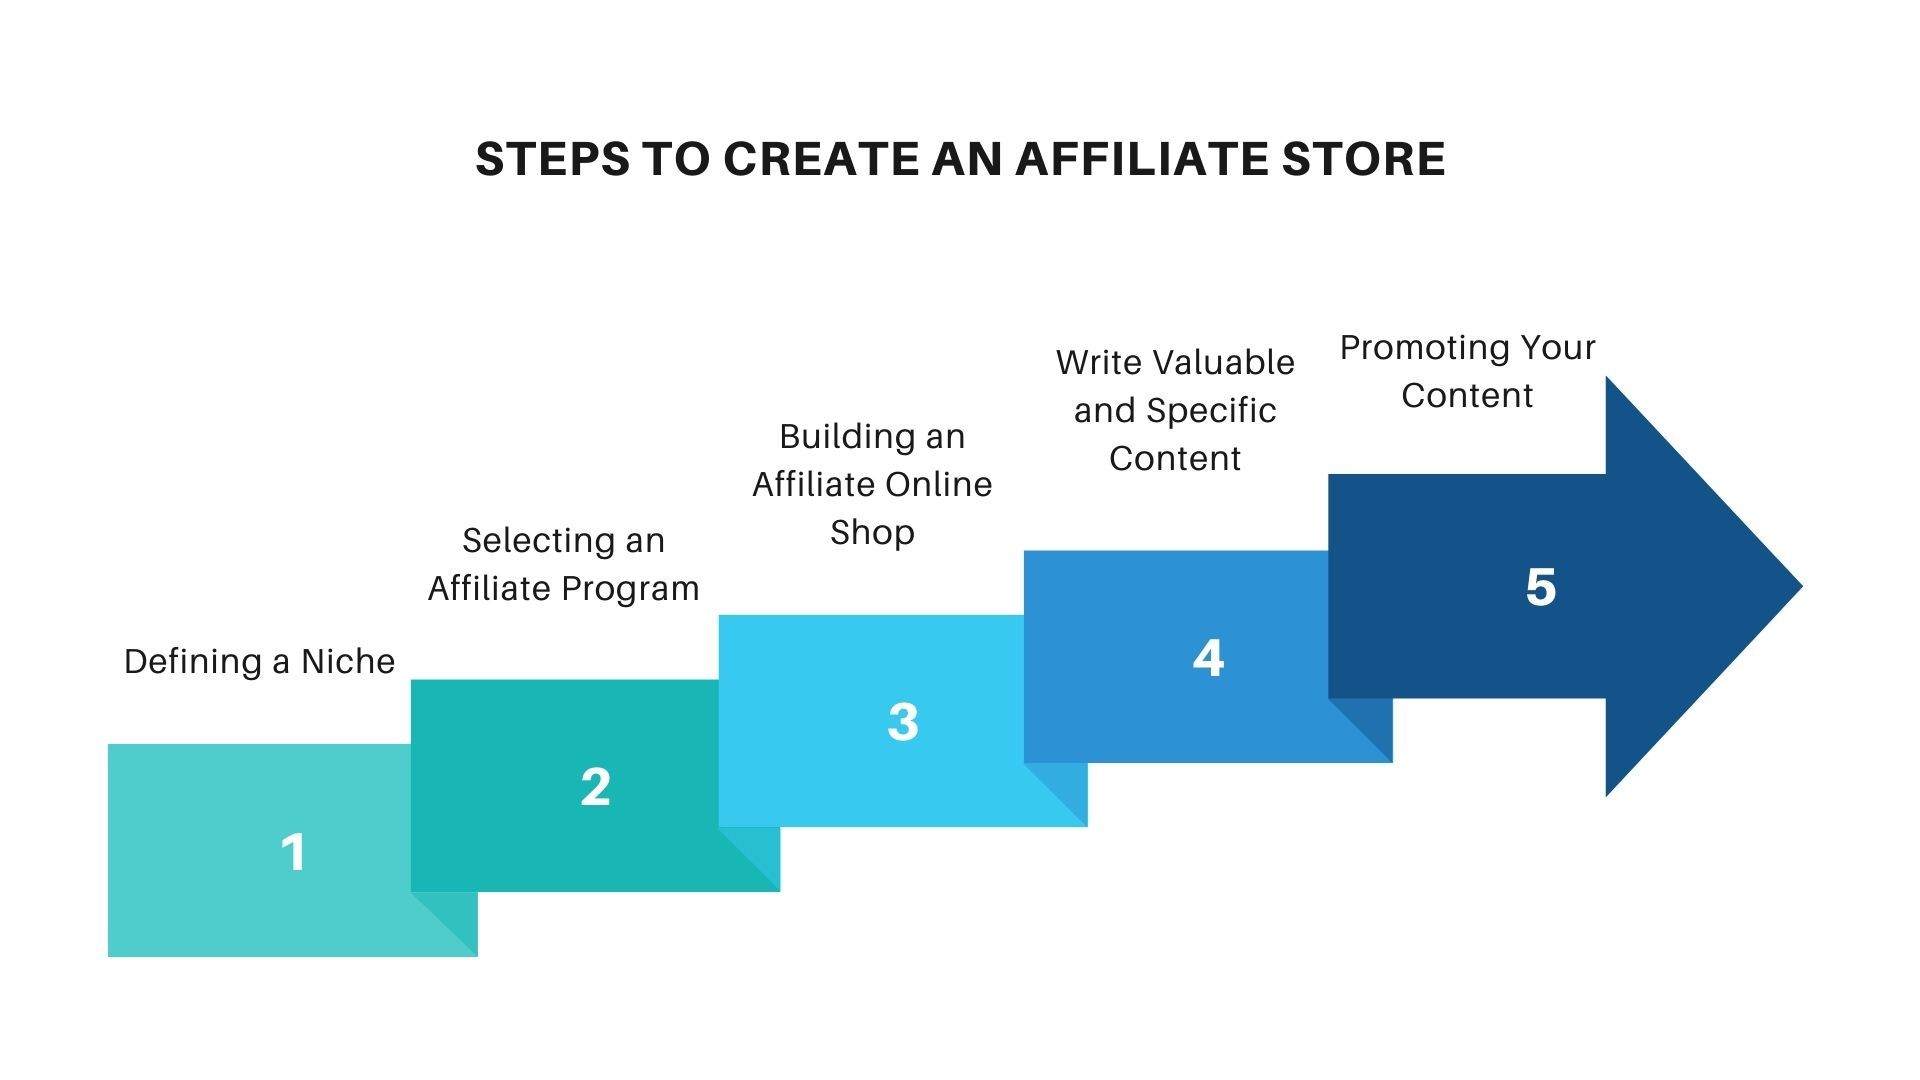 Steps to Create an Affiliate Store